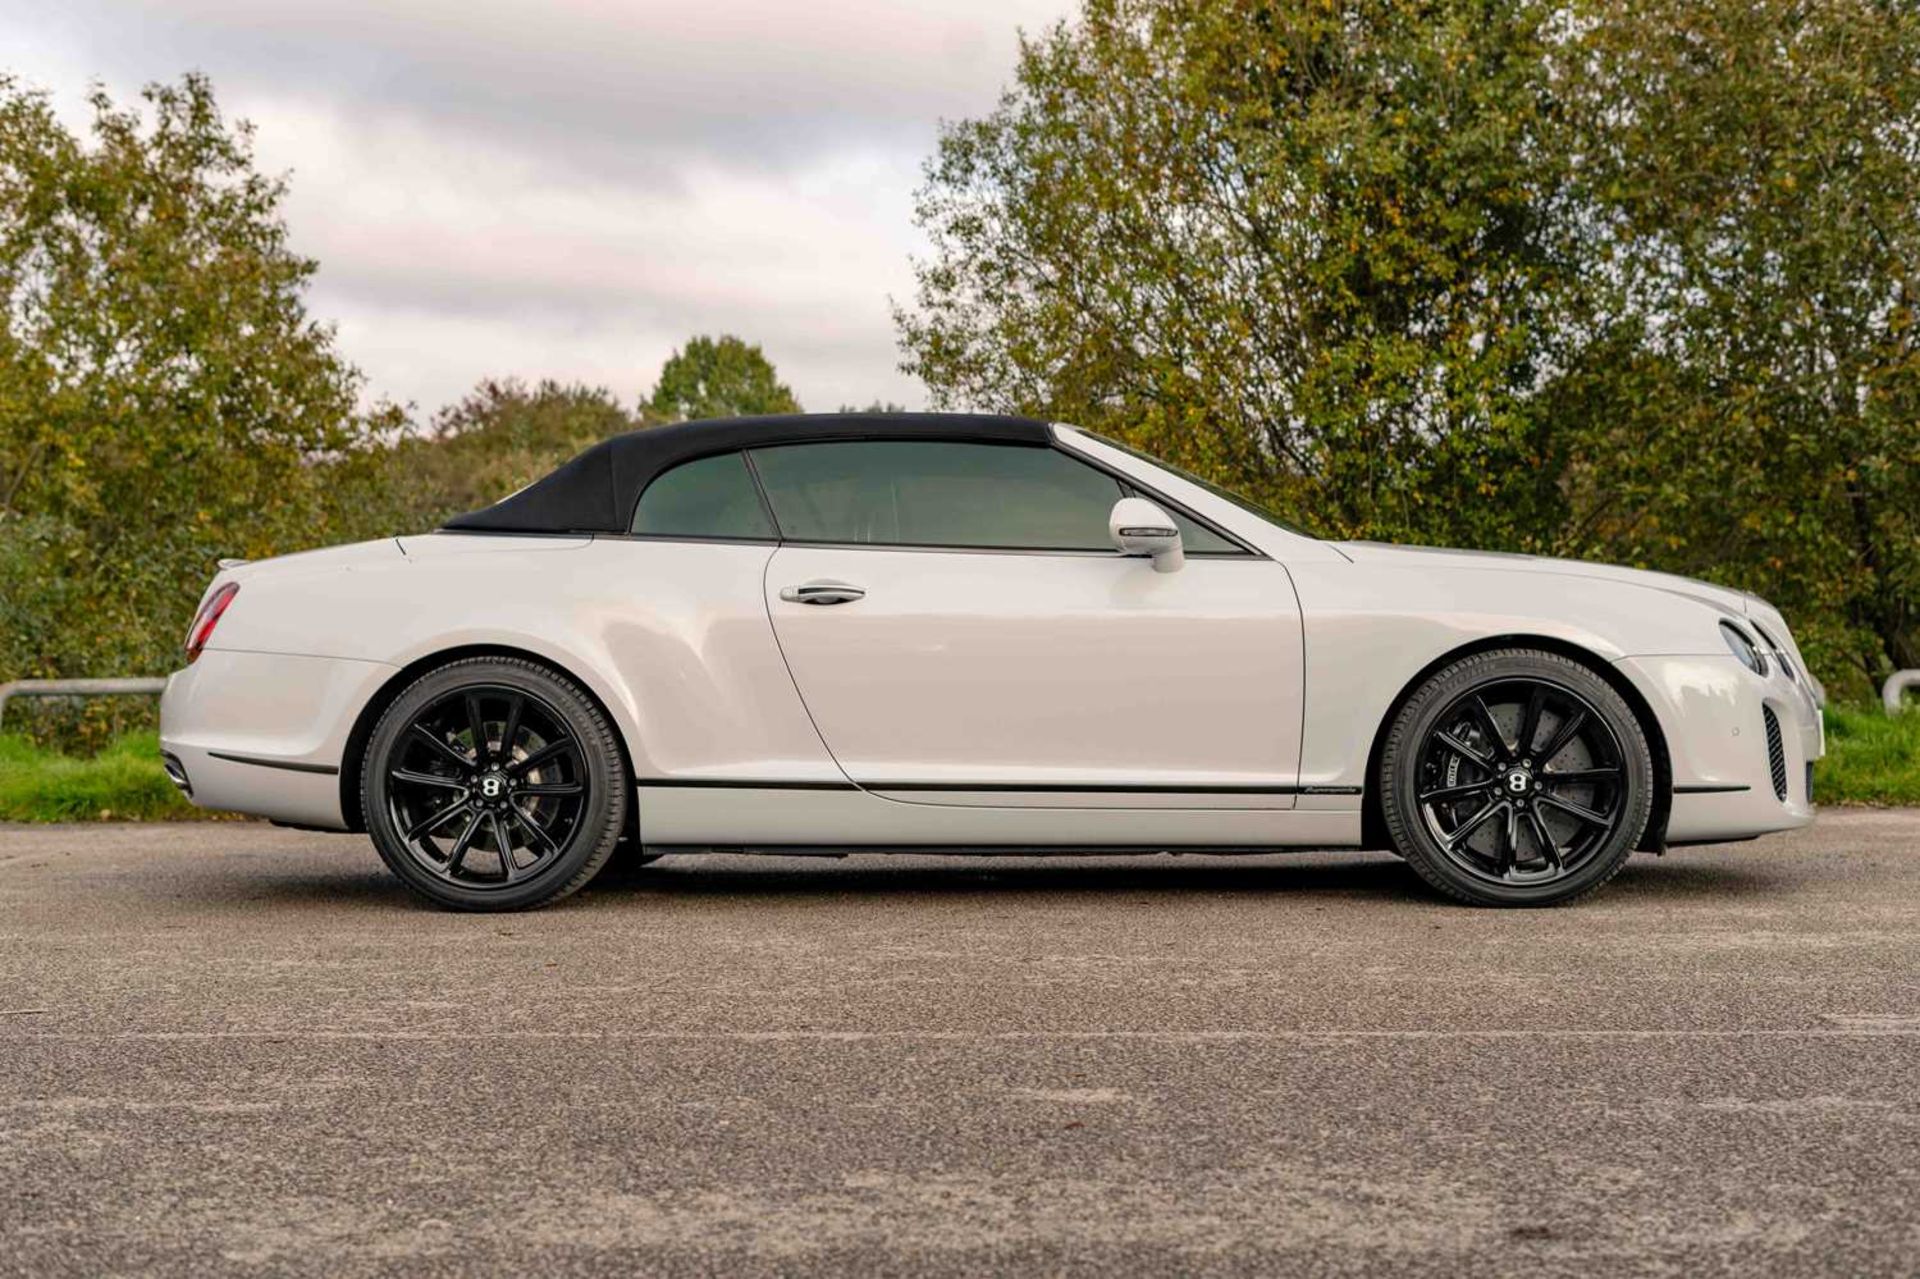 2011 Bentley GTC Supersports Finished in striking Glacier White and riding on gloss black 20” alloy  - Image 15 of 68